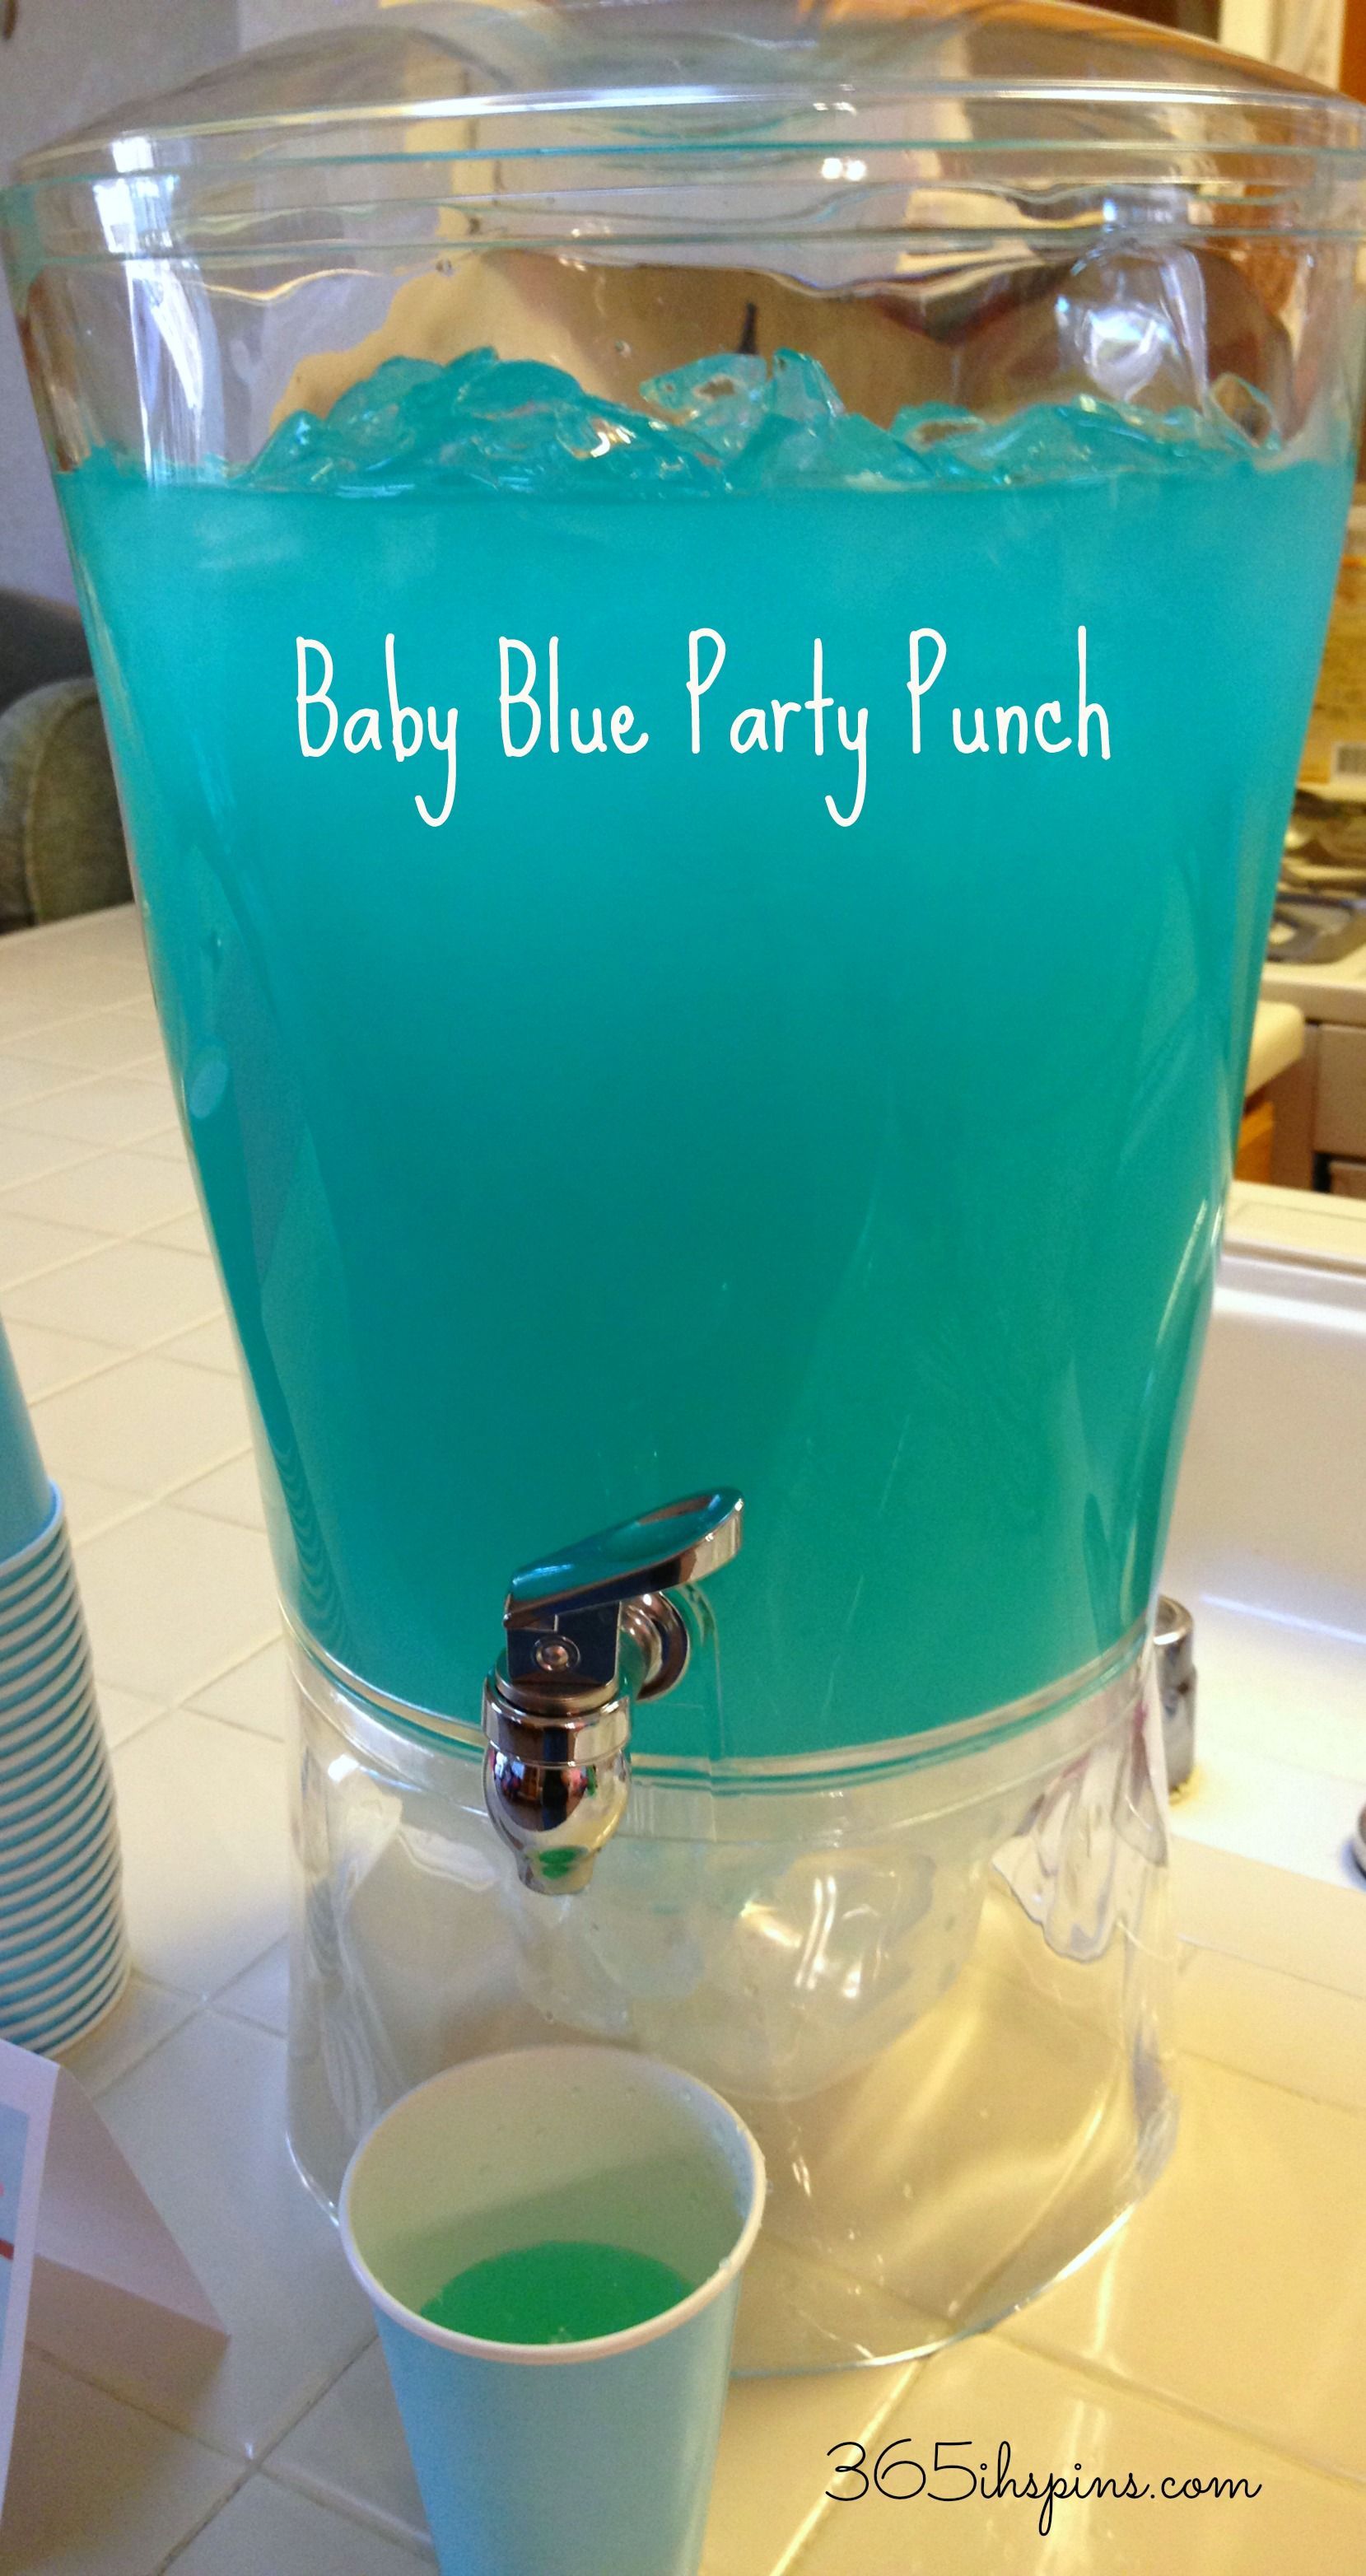 Blue Punch For Baby Shower | Day 291: Pretty Pink Punch & Baby Blue Punch | 365i